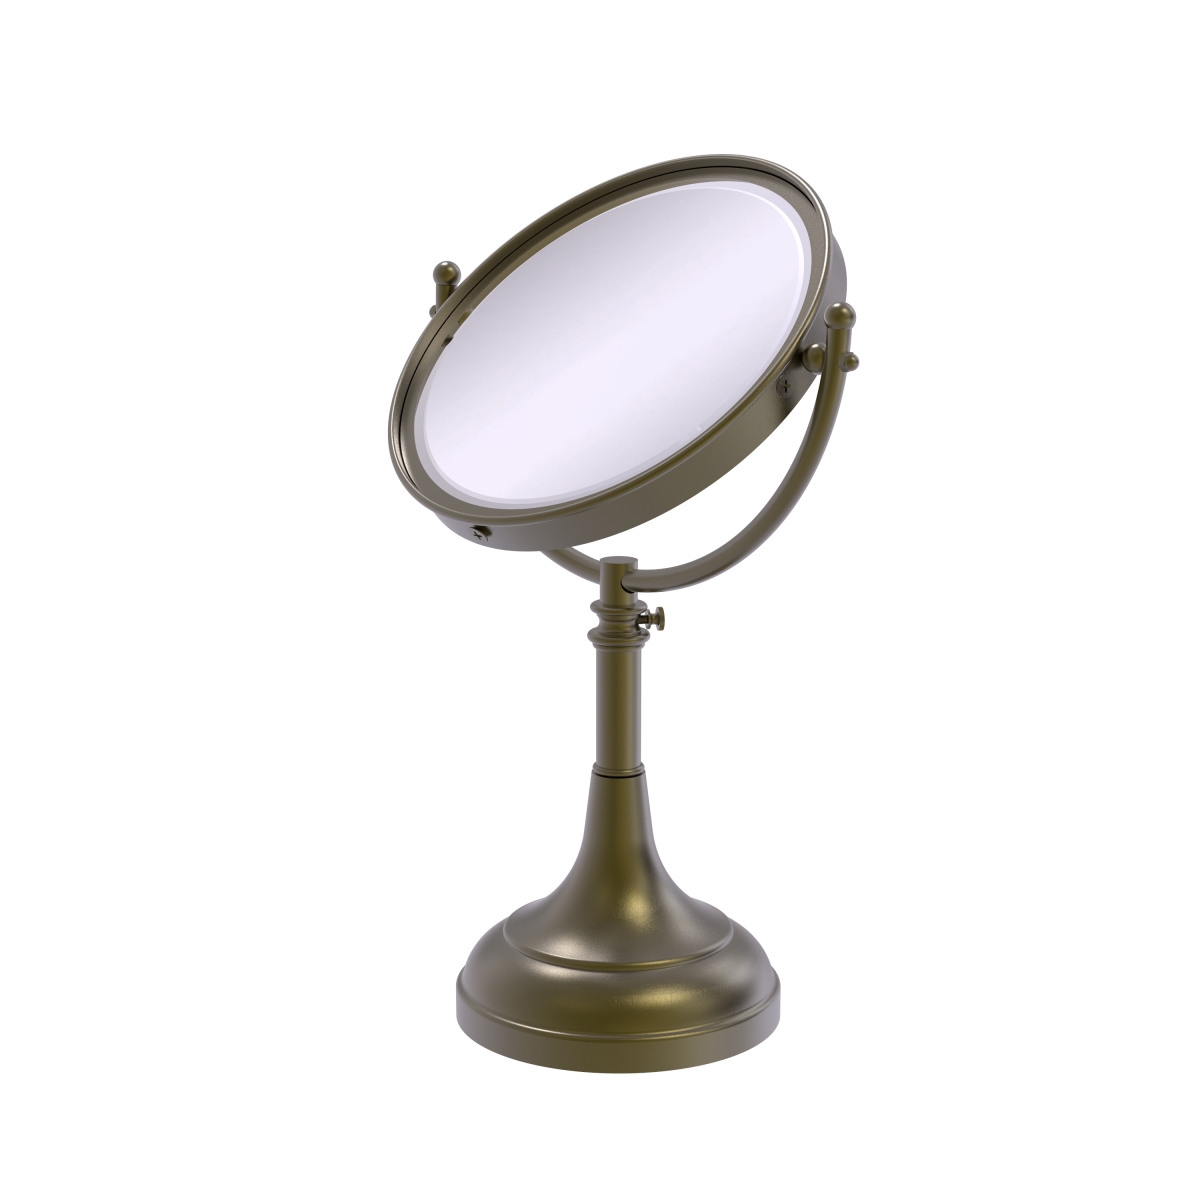 Picture of Allied Brass DM-1-4X-ABR 8 in. Height Adjustable Vanity Top Make-Up Mirror 4X Magnification, Antique Brass